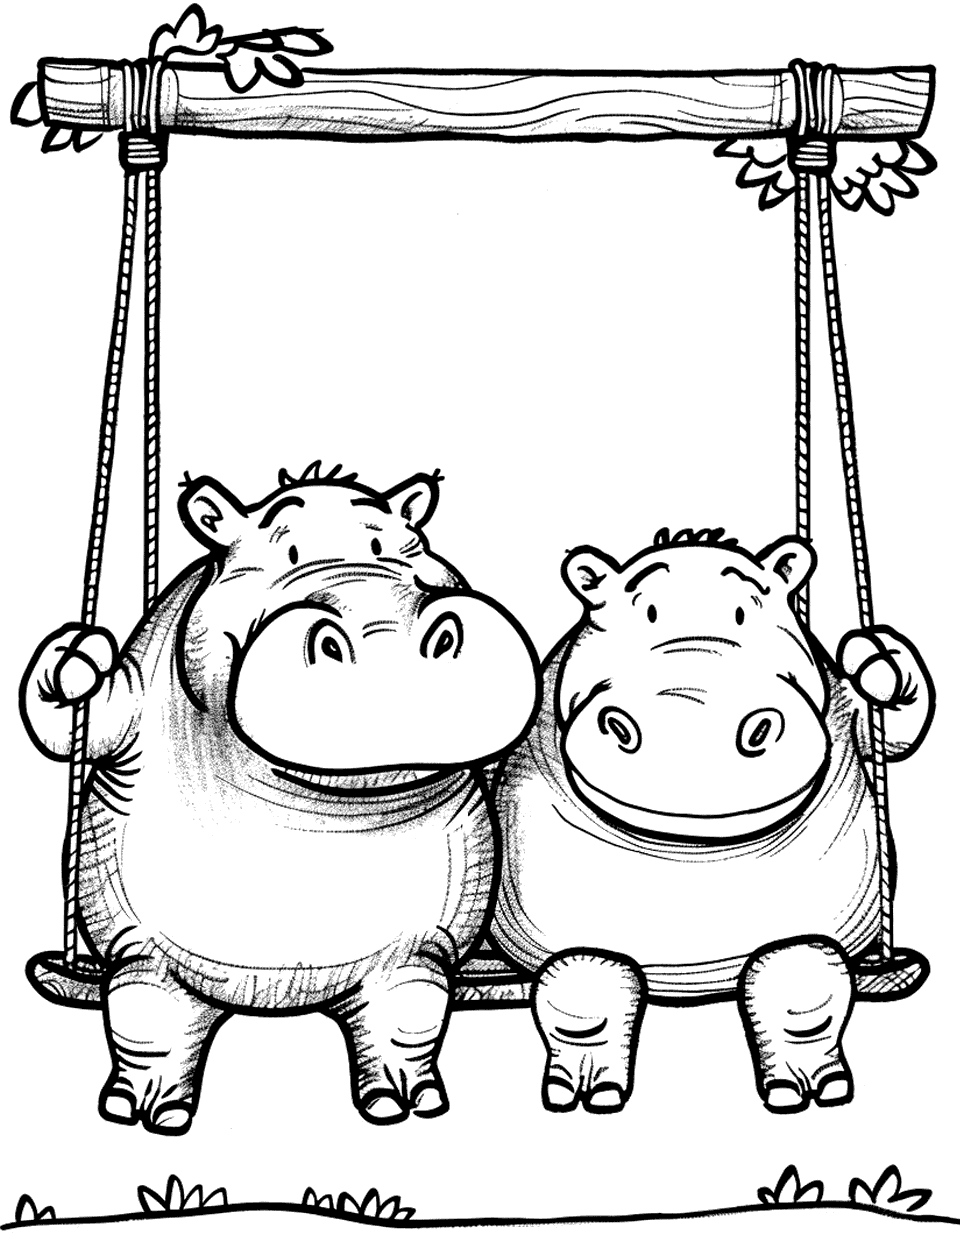 Hippo Playground Fun Coloring Page - Hippos playing on a playground swinging on swings.